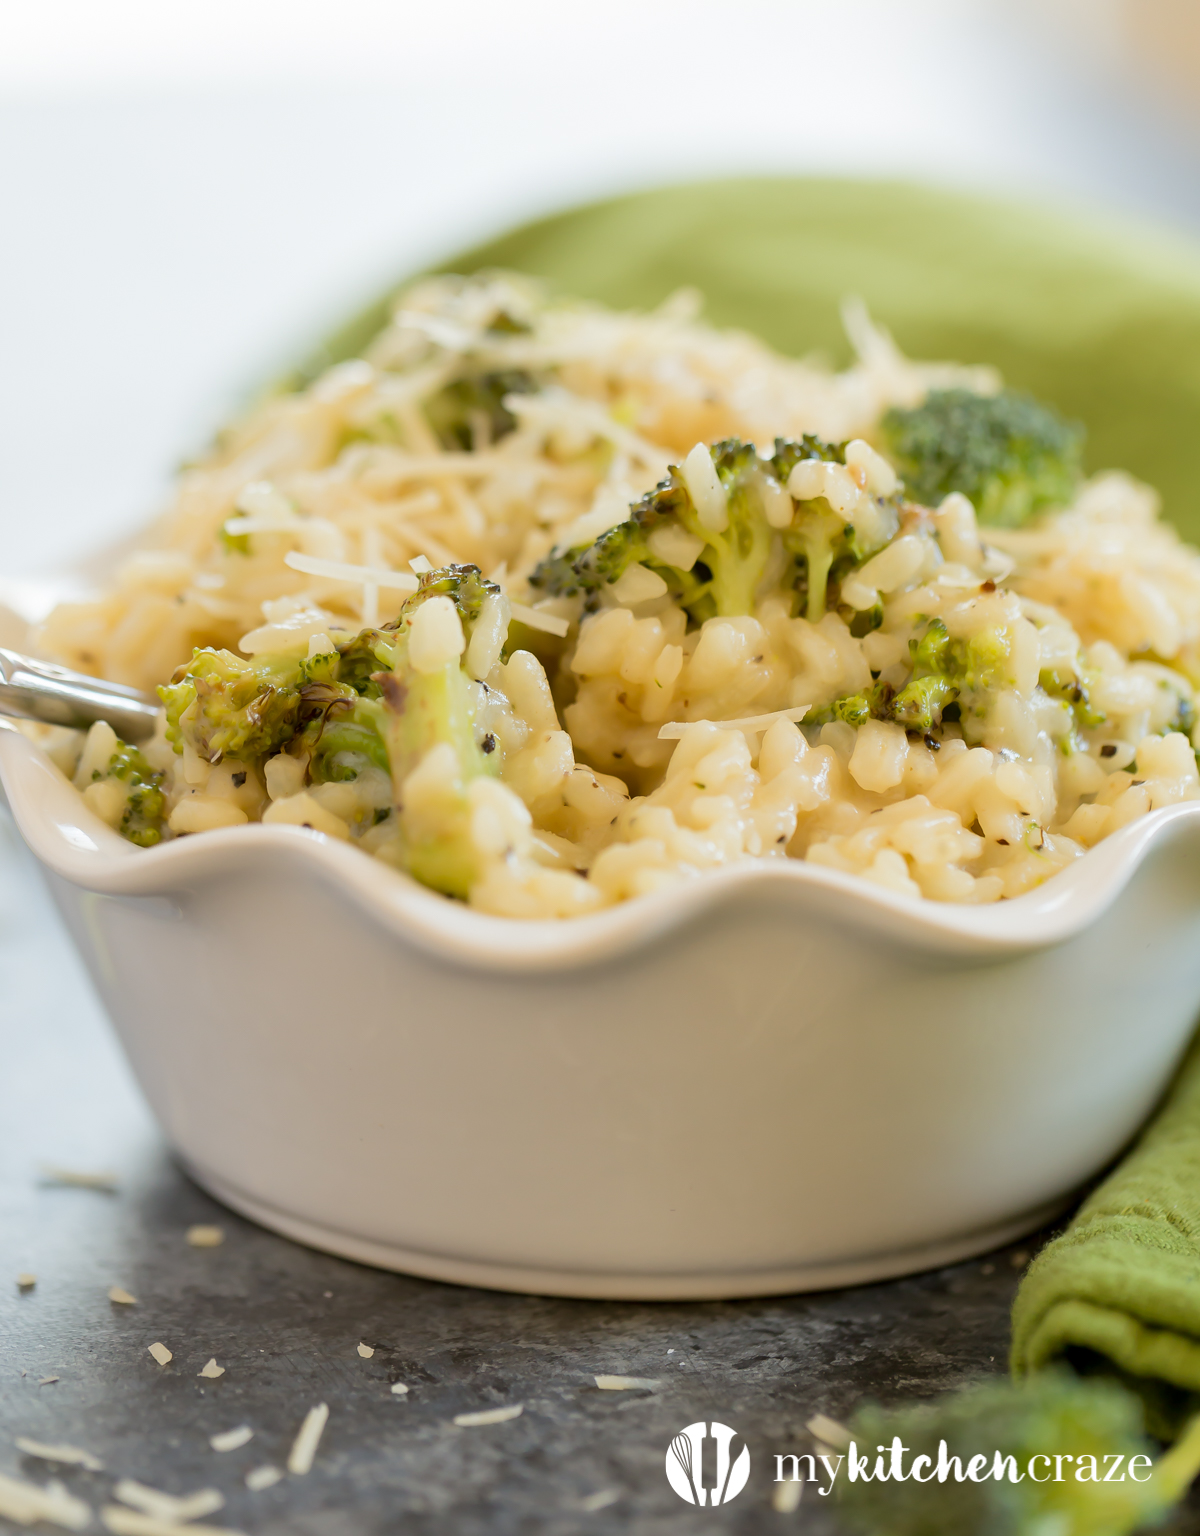 Roasted Broccoli Risotto is the perfect side dish to accompany fish and chicken entrees. This rice is easy to throw together, creamy and has the perfect flavors.